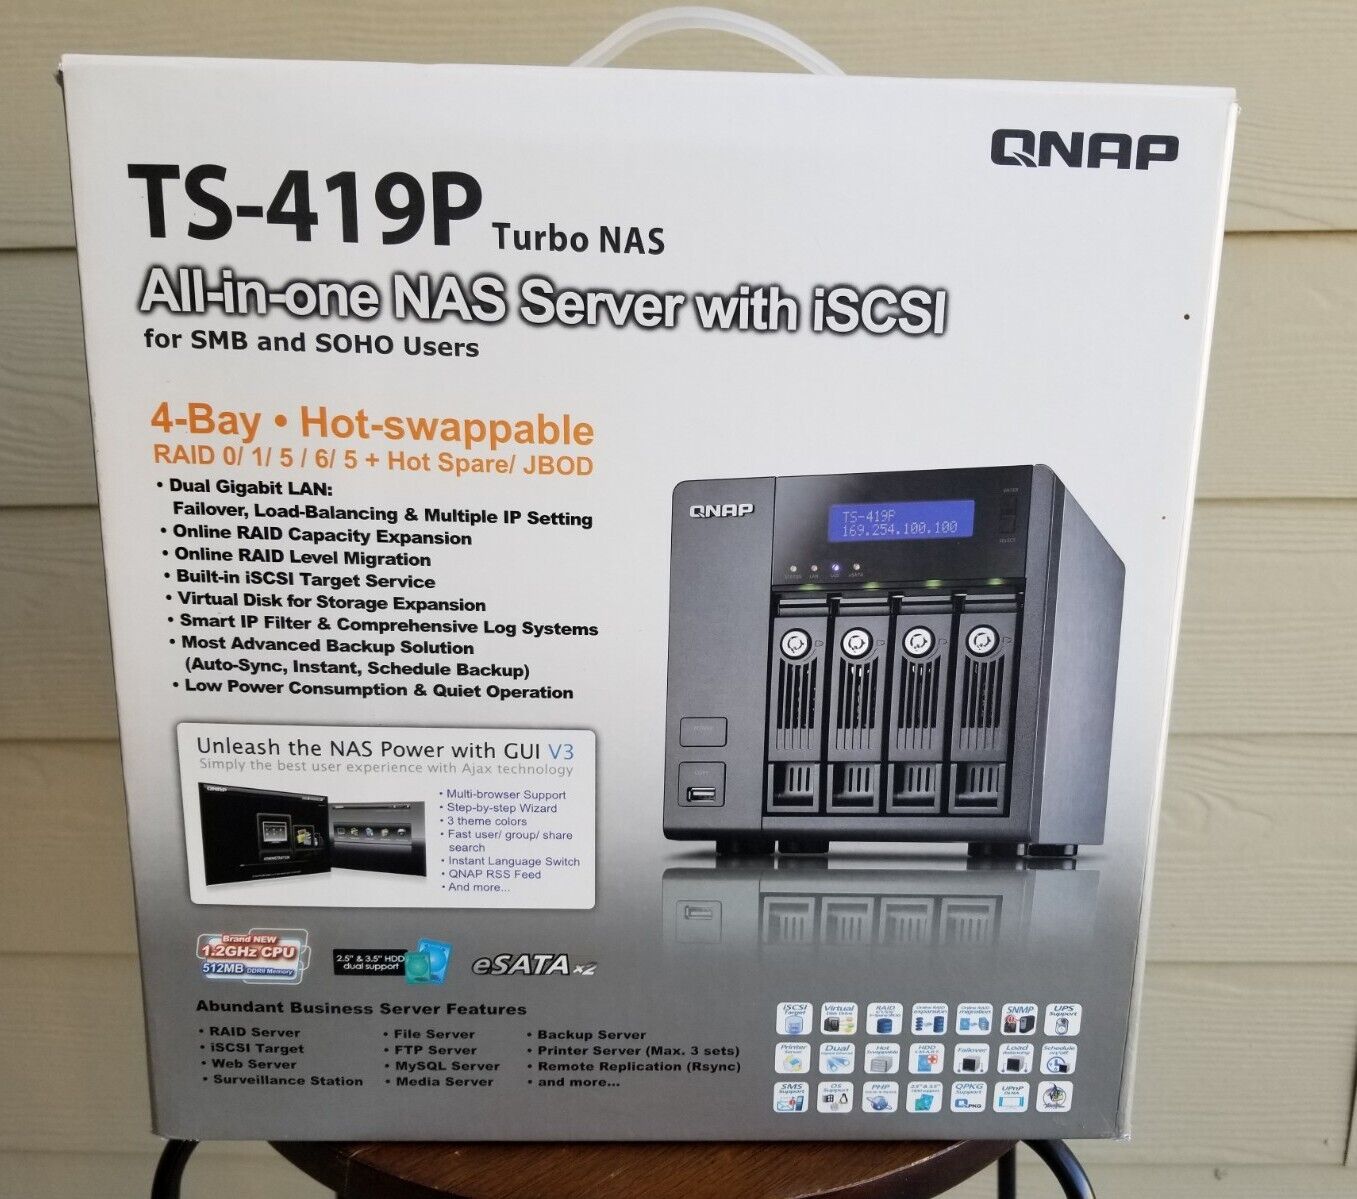 New QNAP (TS-419P) Turbo NAS All in One SERVER with iSCSI 4 BAY 512MB DDRII RAM